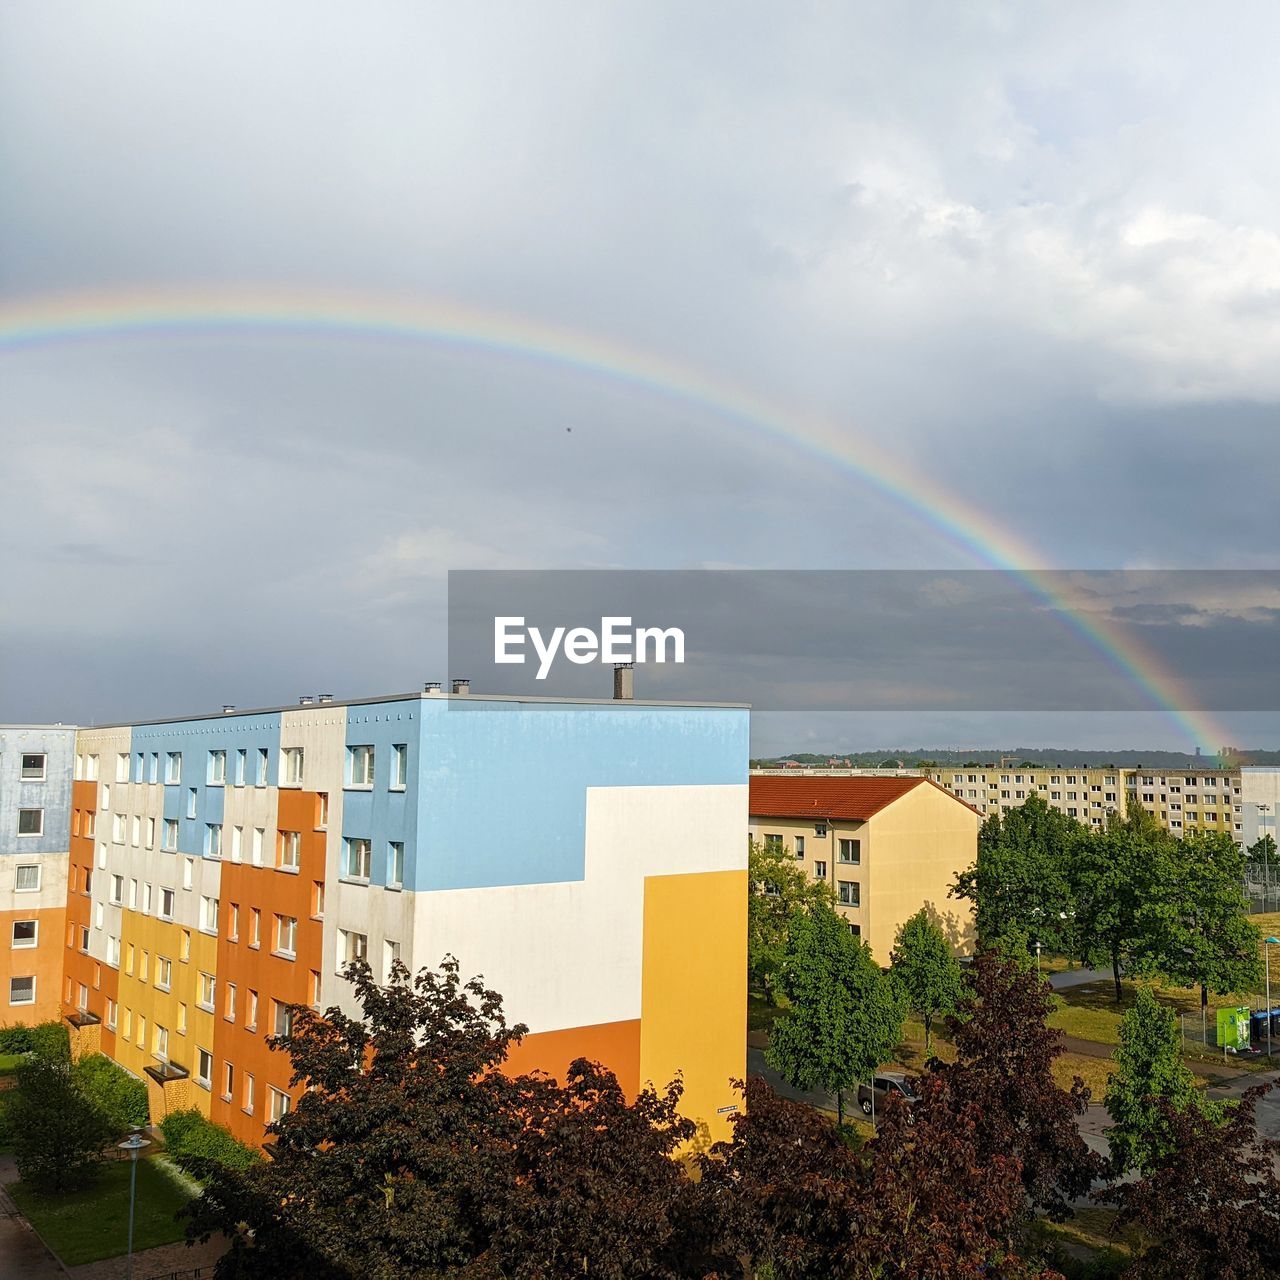 rainbow, architecture, building exterior, built structure, sky, cloud, building, multi colored, city, nature, tree, plant, double rainbow, residential district, beauty in nature, no people, outdoors, day, house, scenics - nature, sunlight, environment, horizon, cityscape, skyline, neighbourhood, water, landscape, urban area